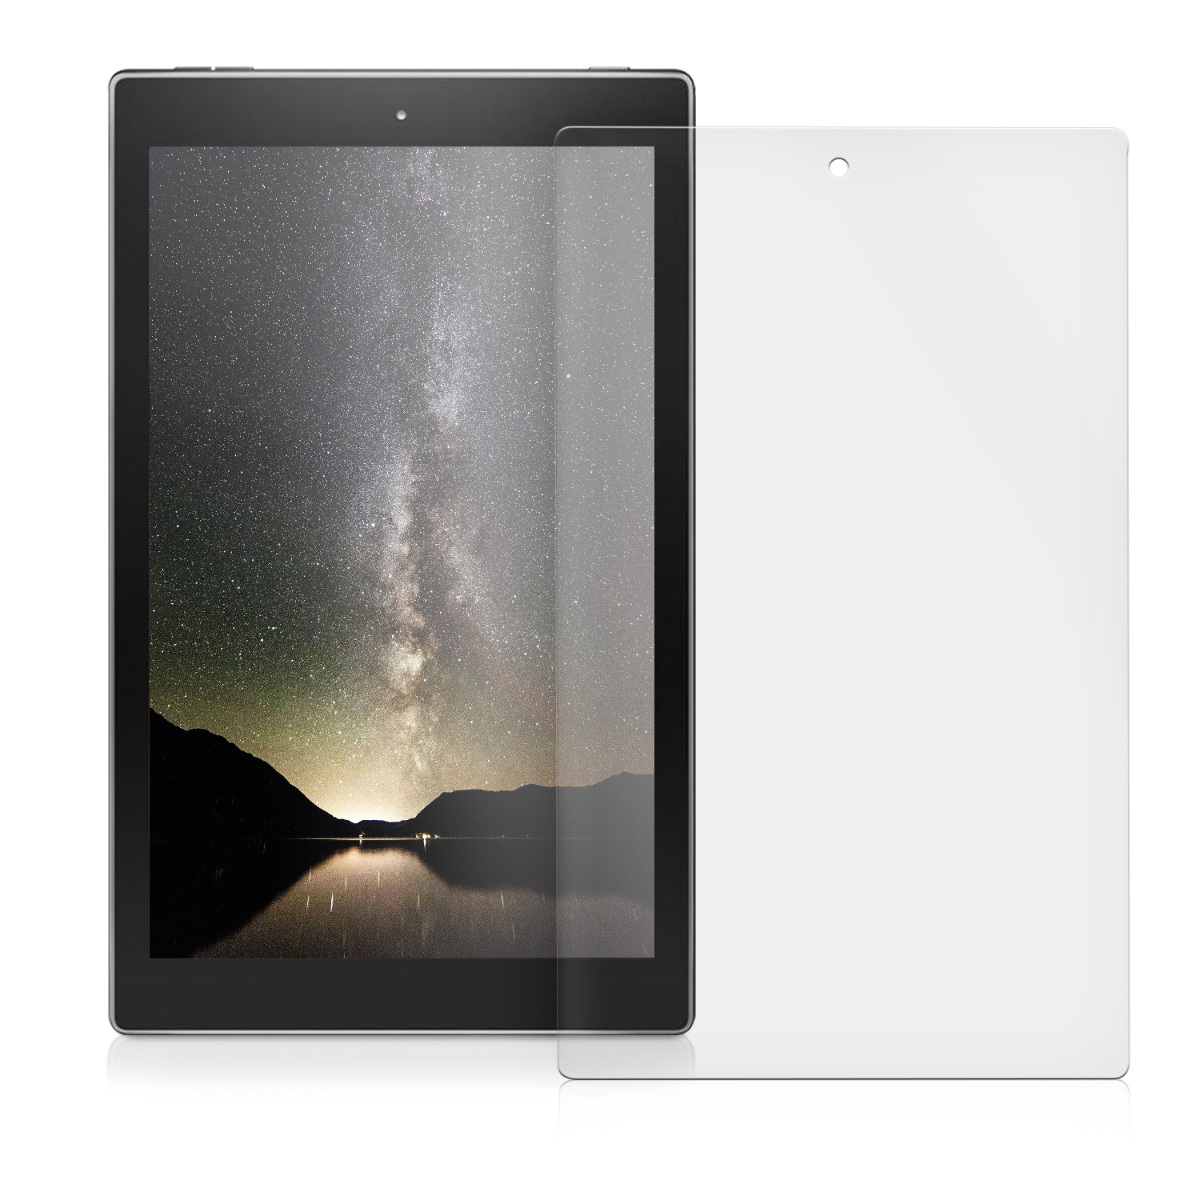 kwmobile SCREEN PROTECTOR FOR AMAZON FIRE HD 10 (2015) DISPLAY FILM TABLET